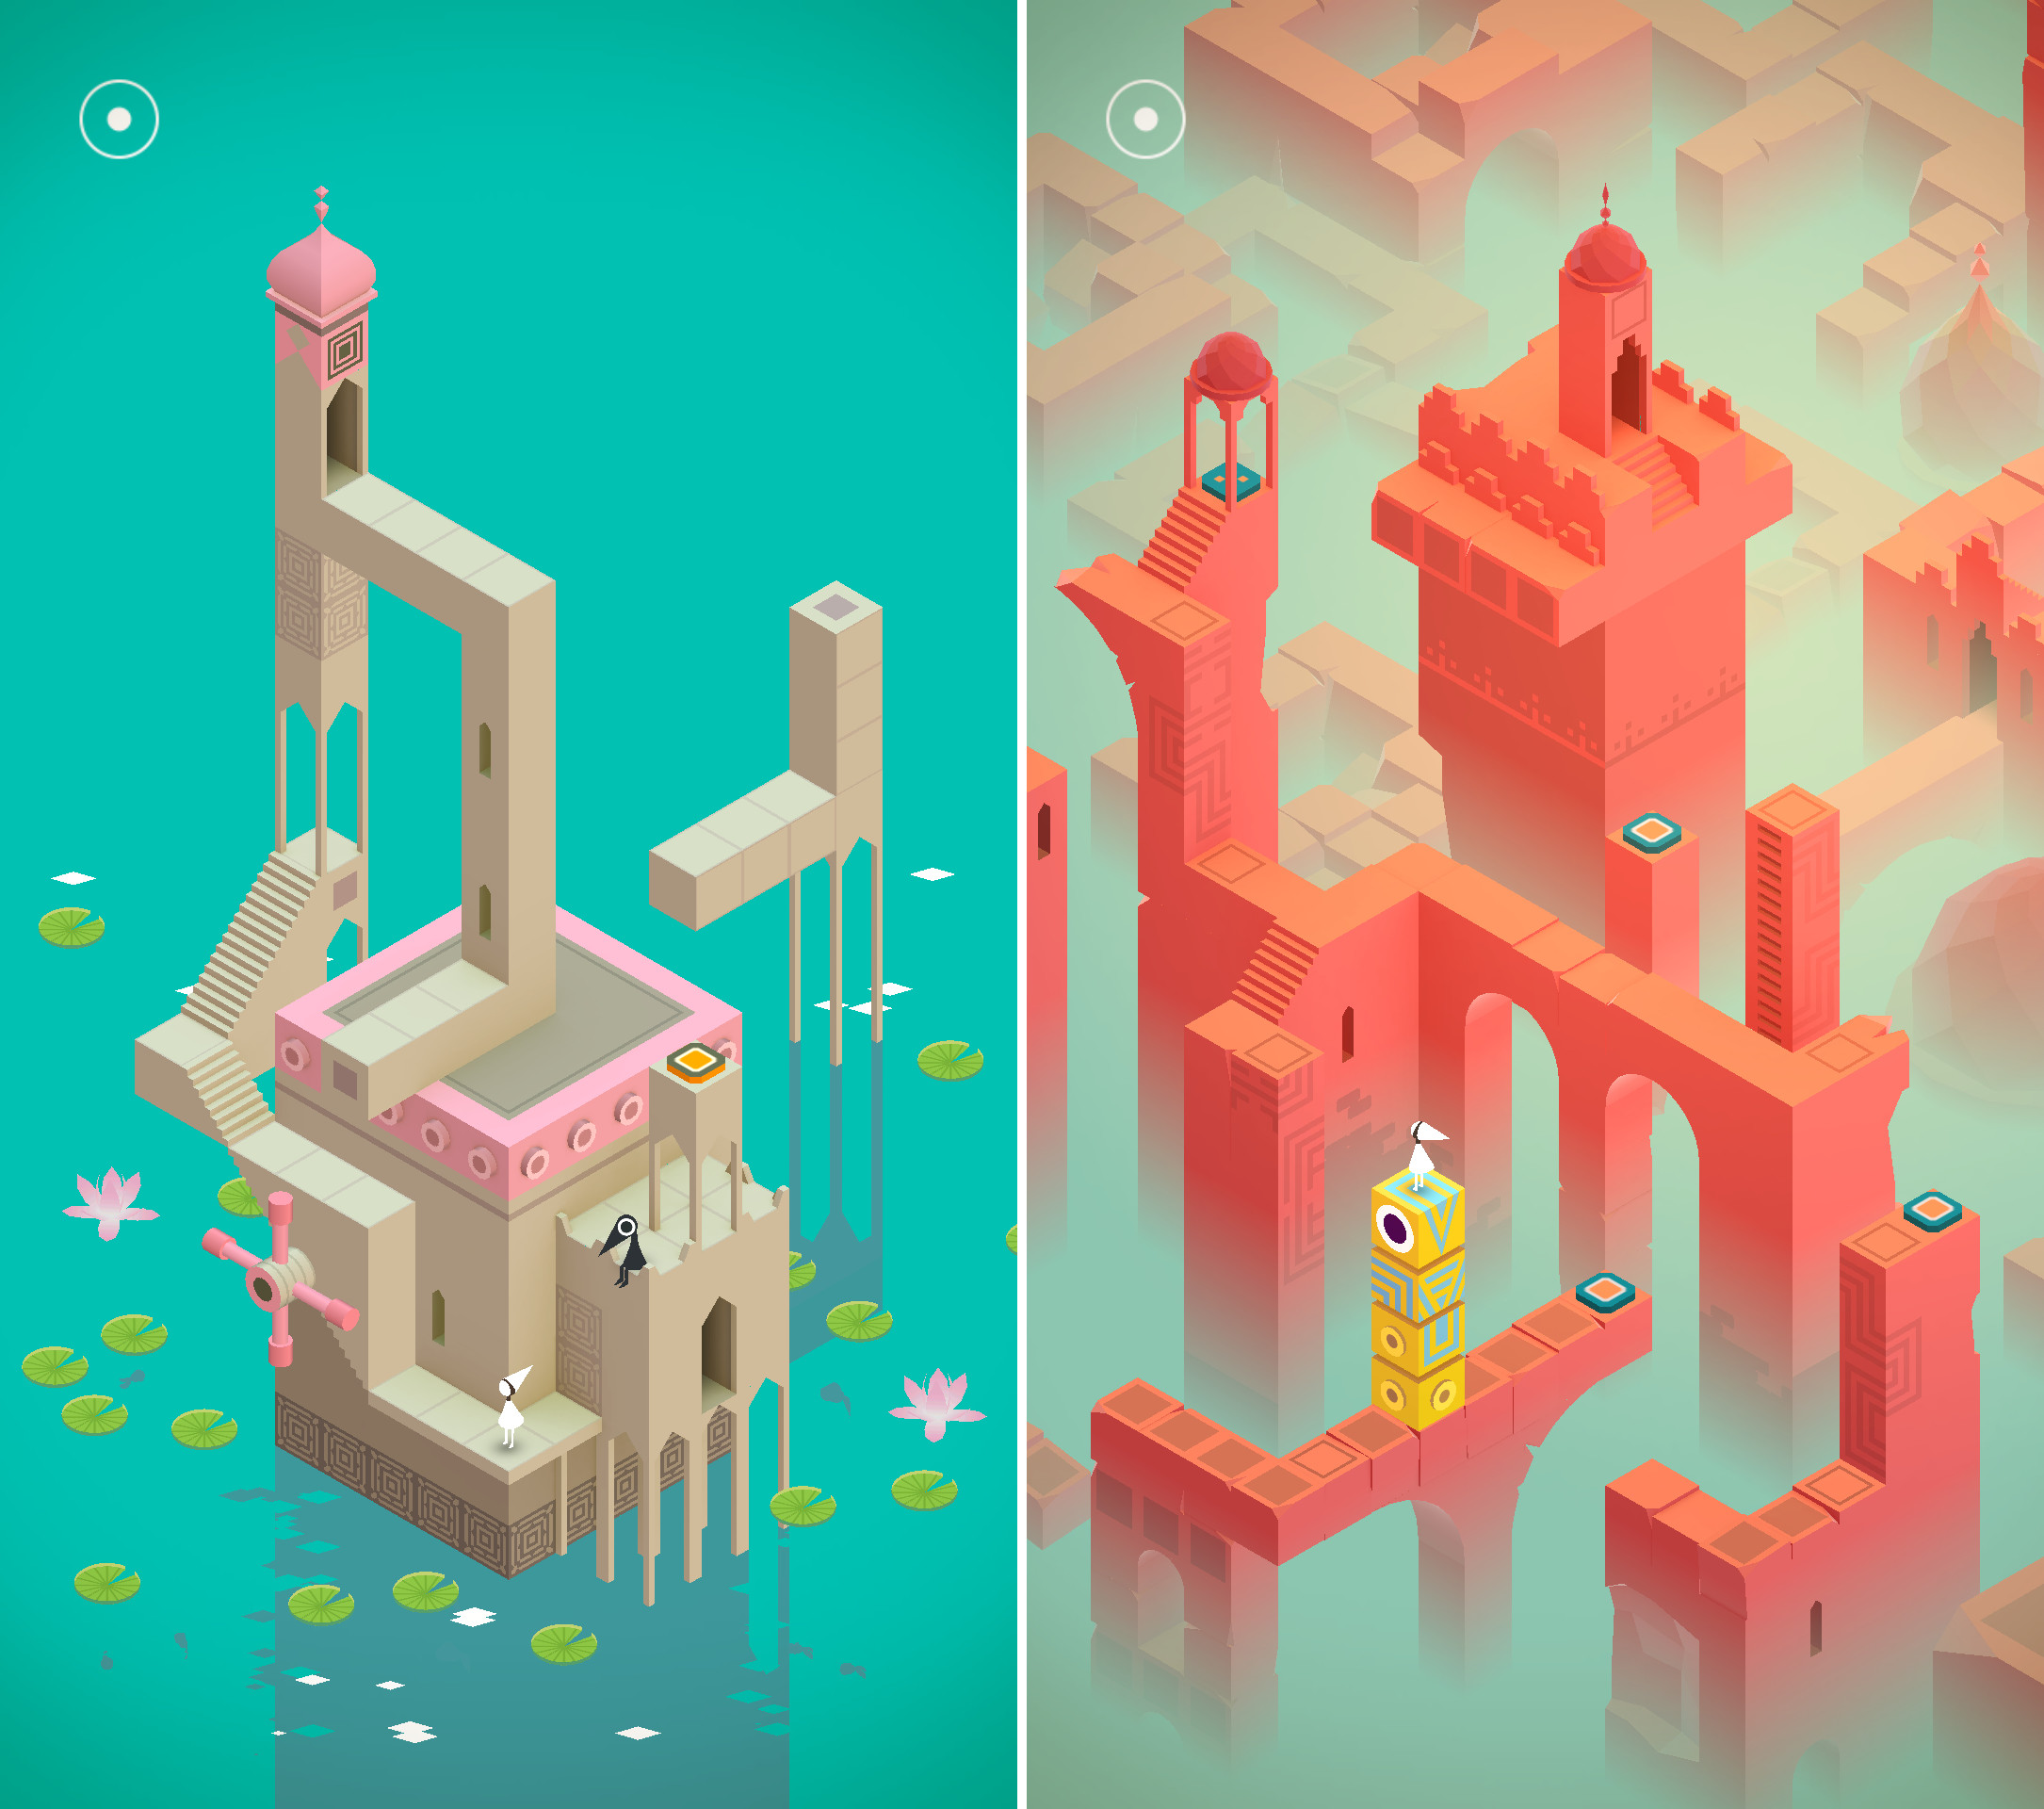 2170x1920 bestpuzzlegames monumentvalley. See larger image